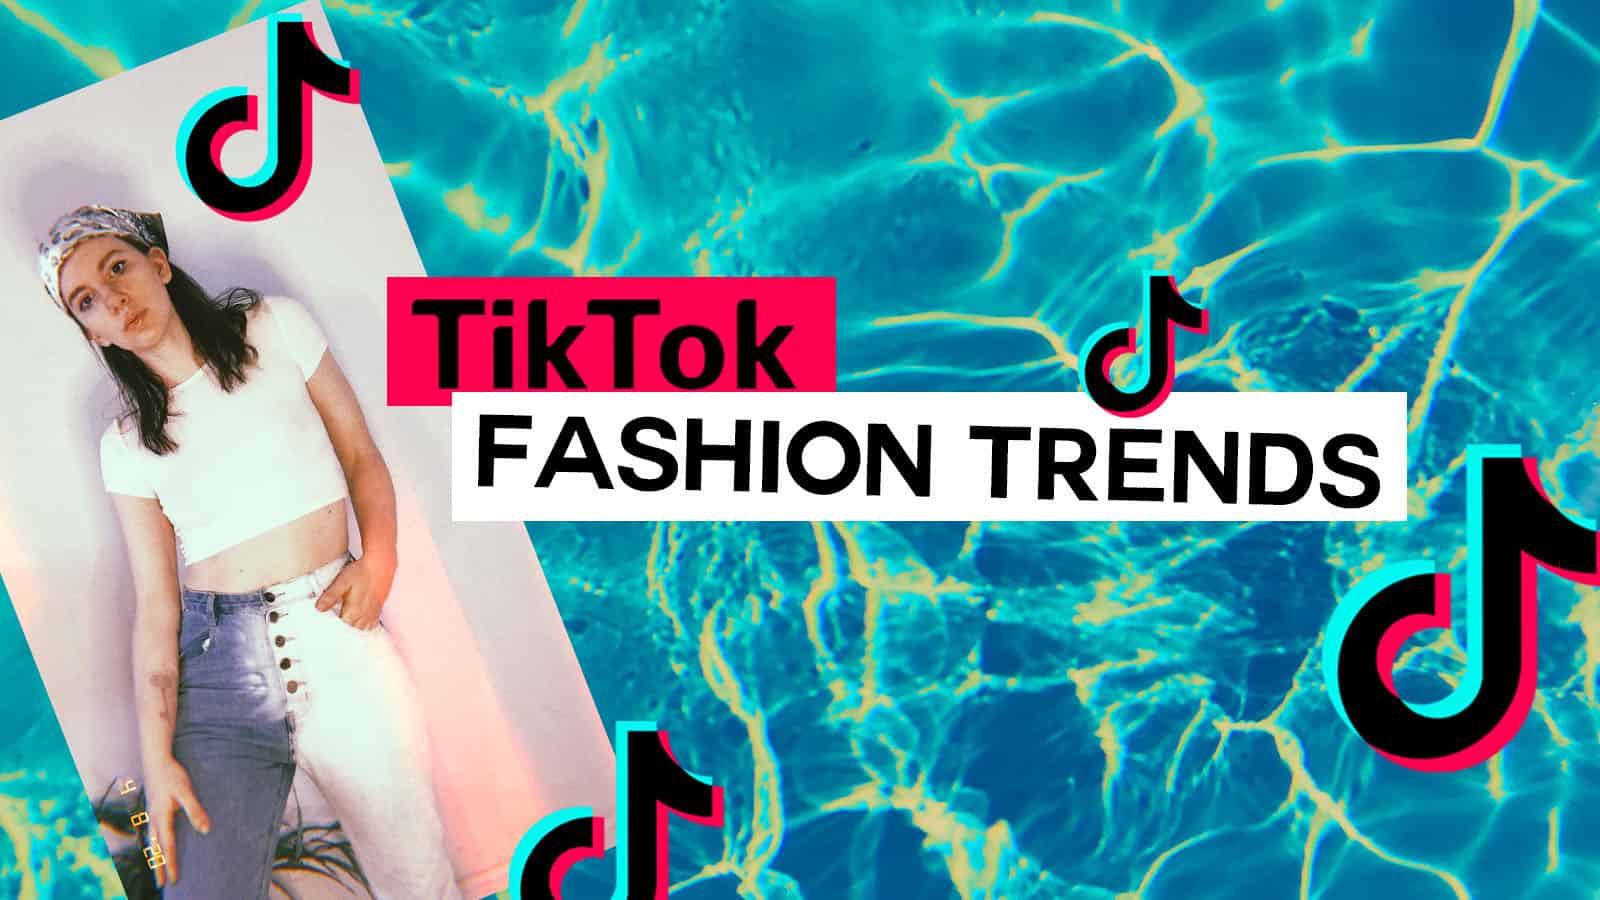 TikTok Fashion Trends: here’s what you need to know